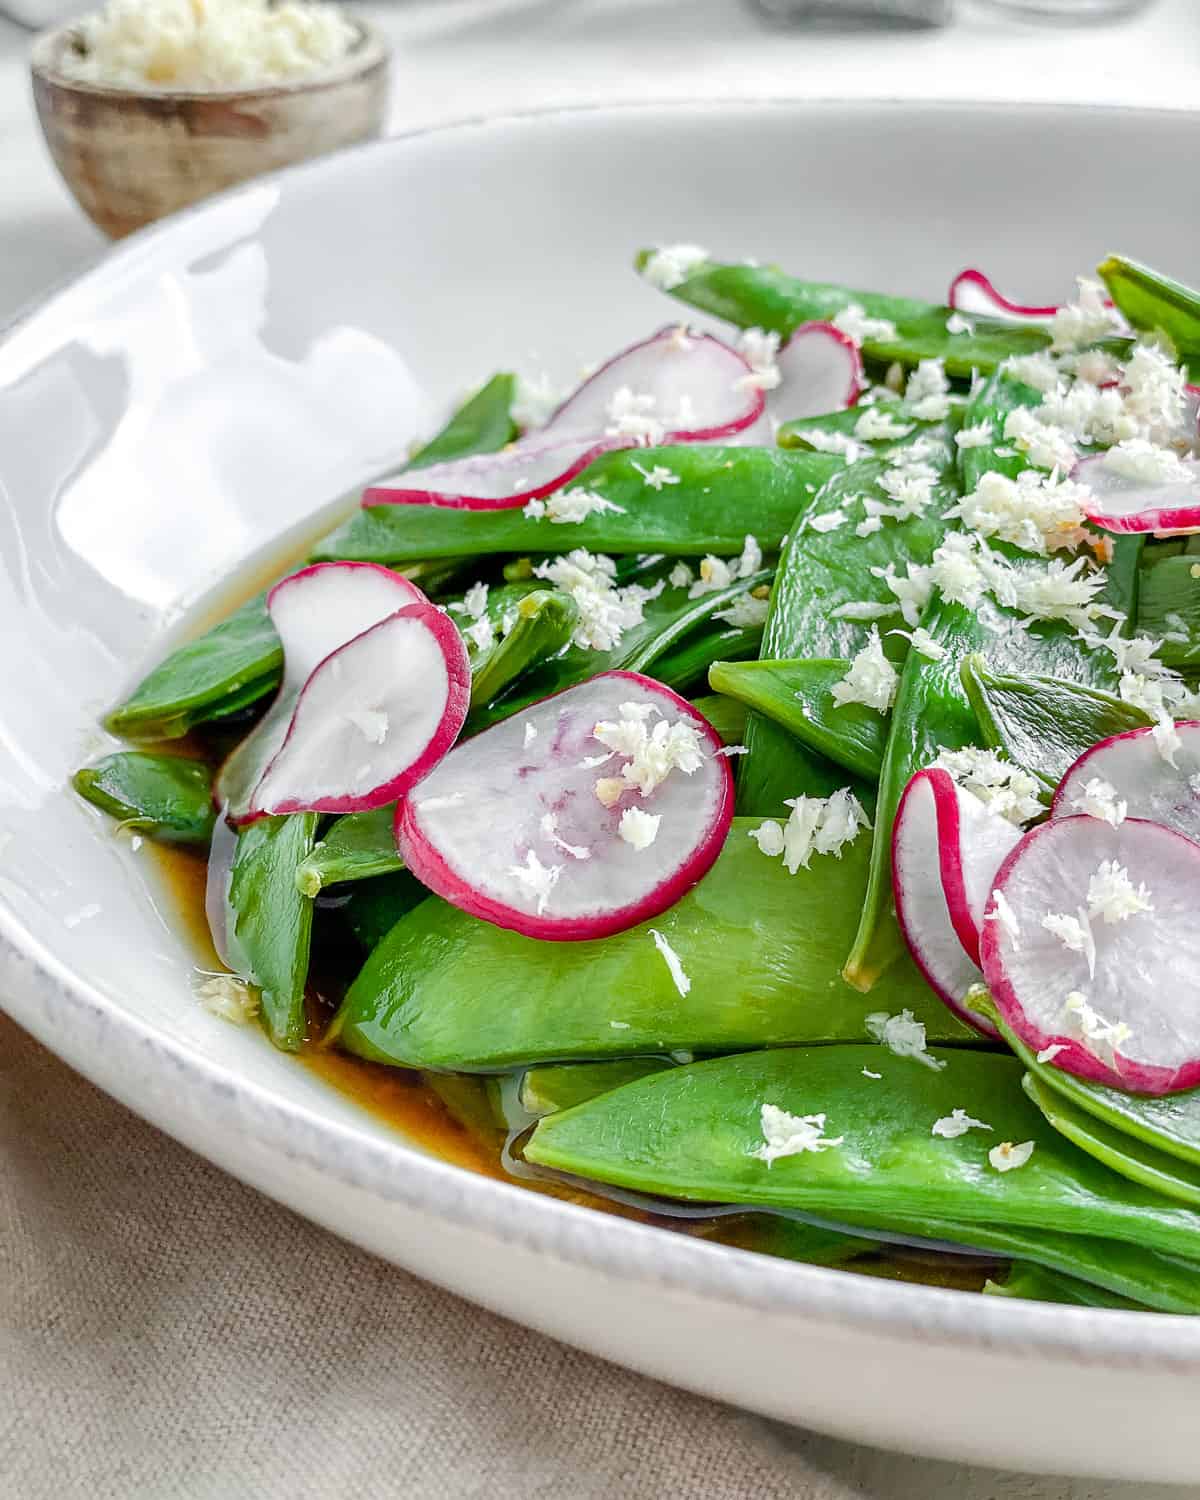 completed Spicy Sugar Snap Peas with Horseradish in a white bowl against a white surface